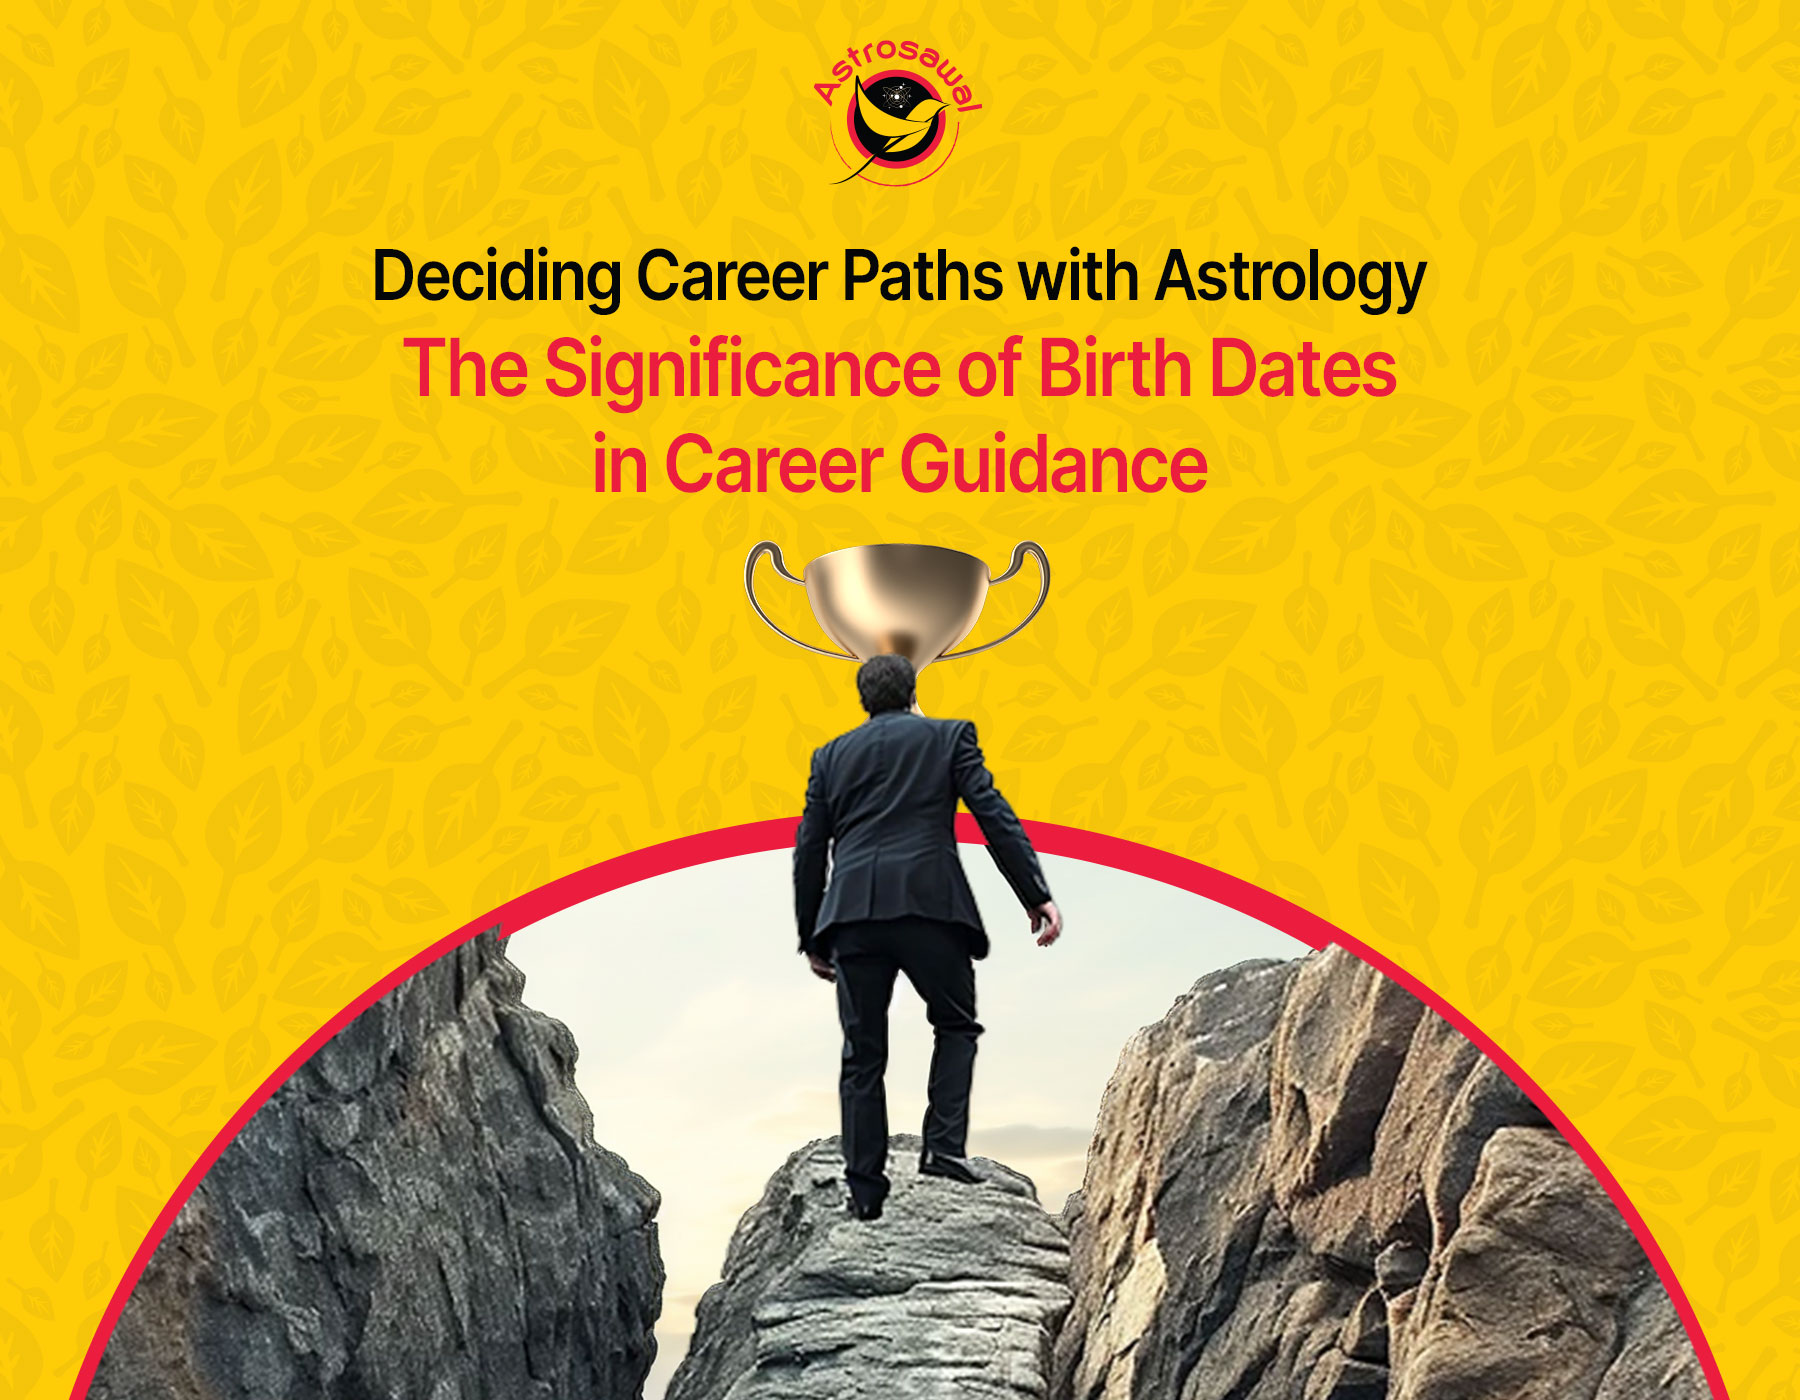 Deciding Career Paths with Astrology: The Significance of Birth Dates in Career Guidance